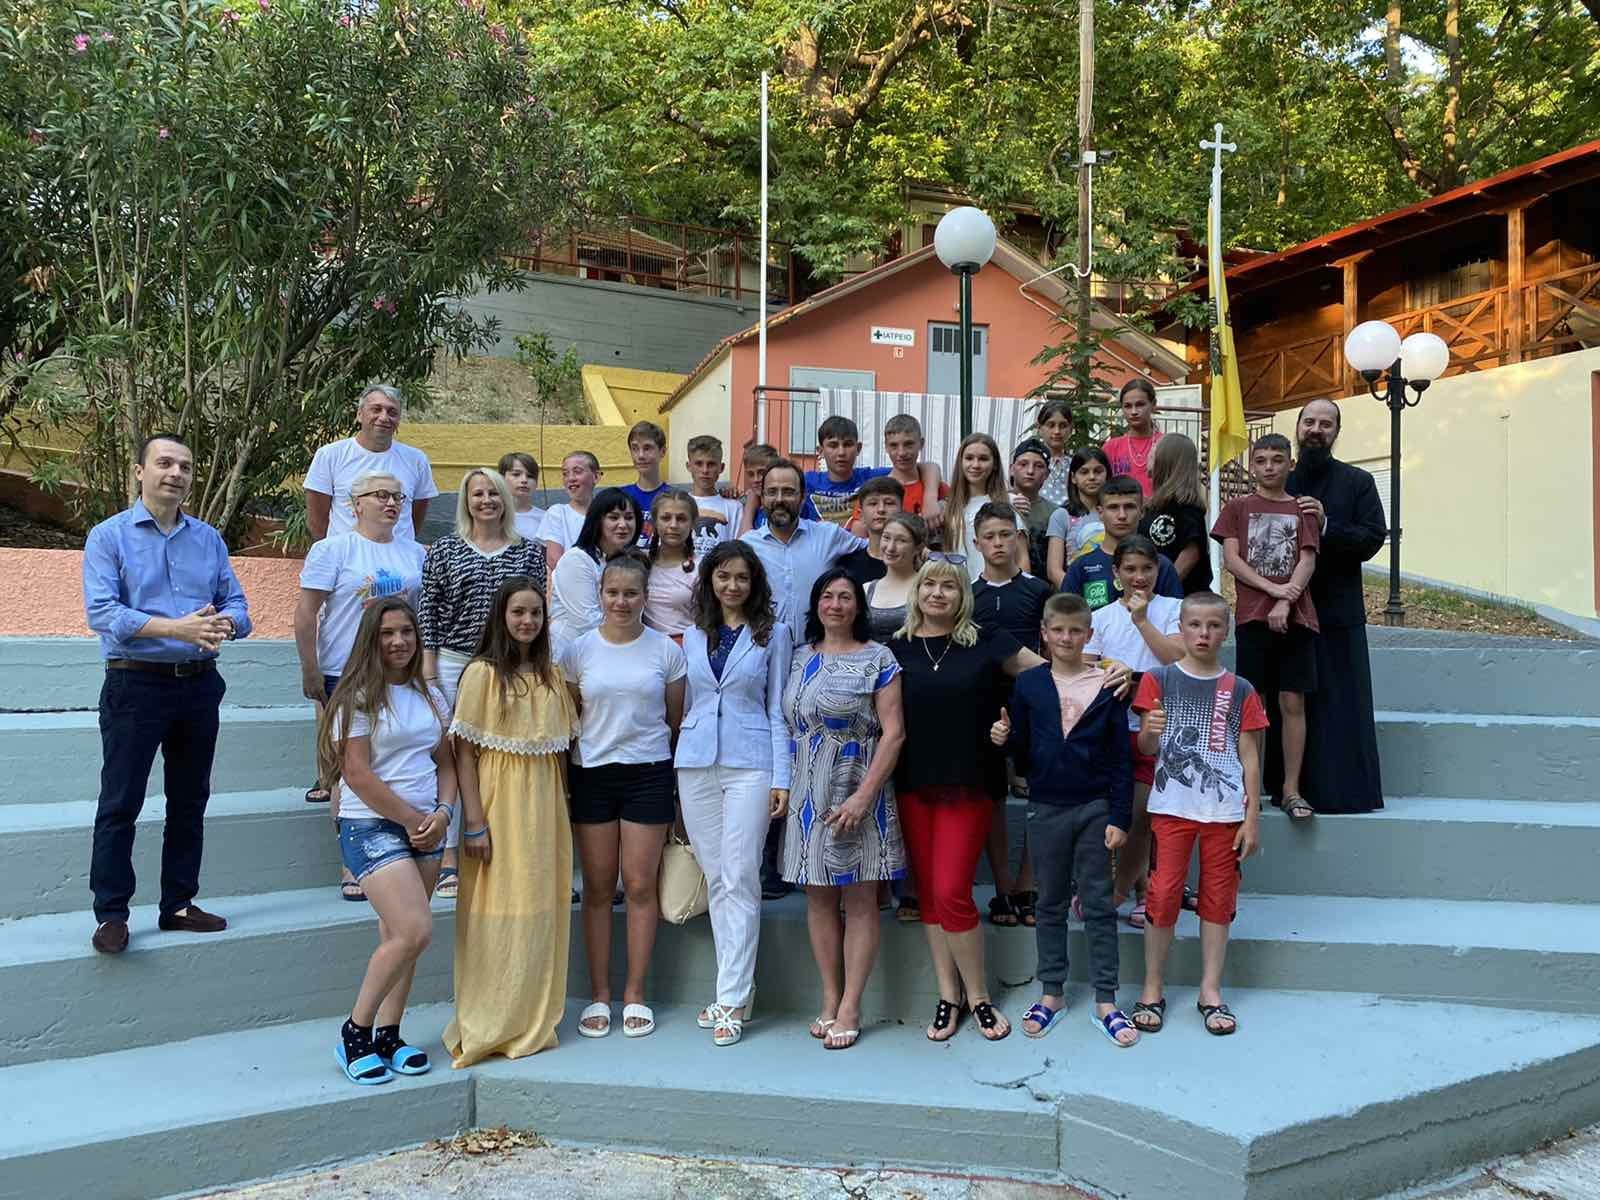 Children from placement centers in the Republic of Moldova spend their summer vacation at a children's camp in Greece